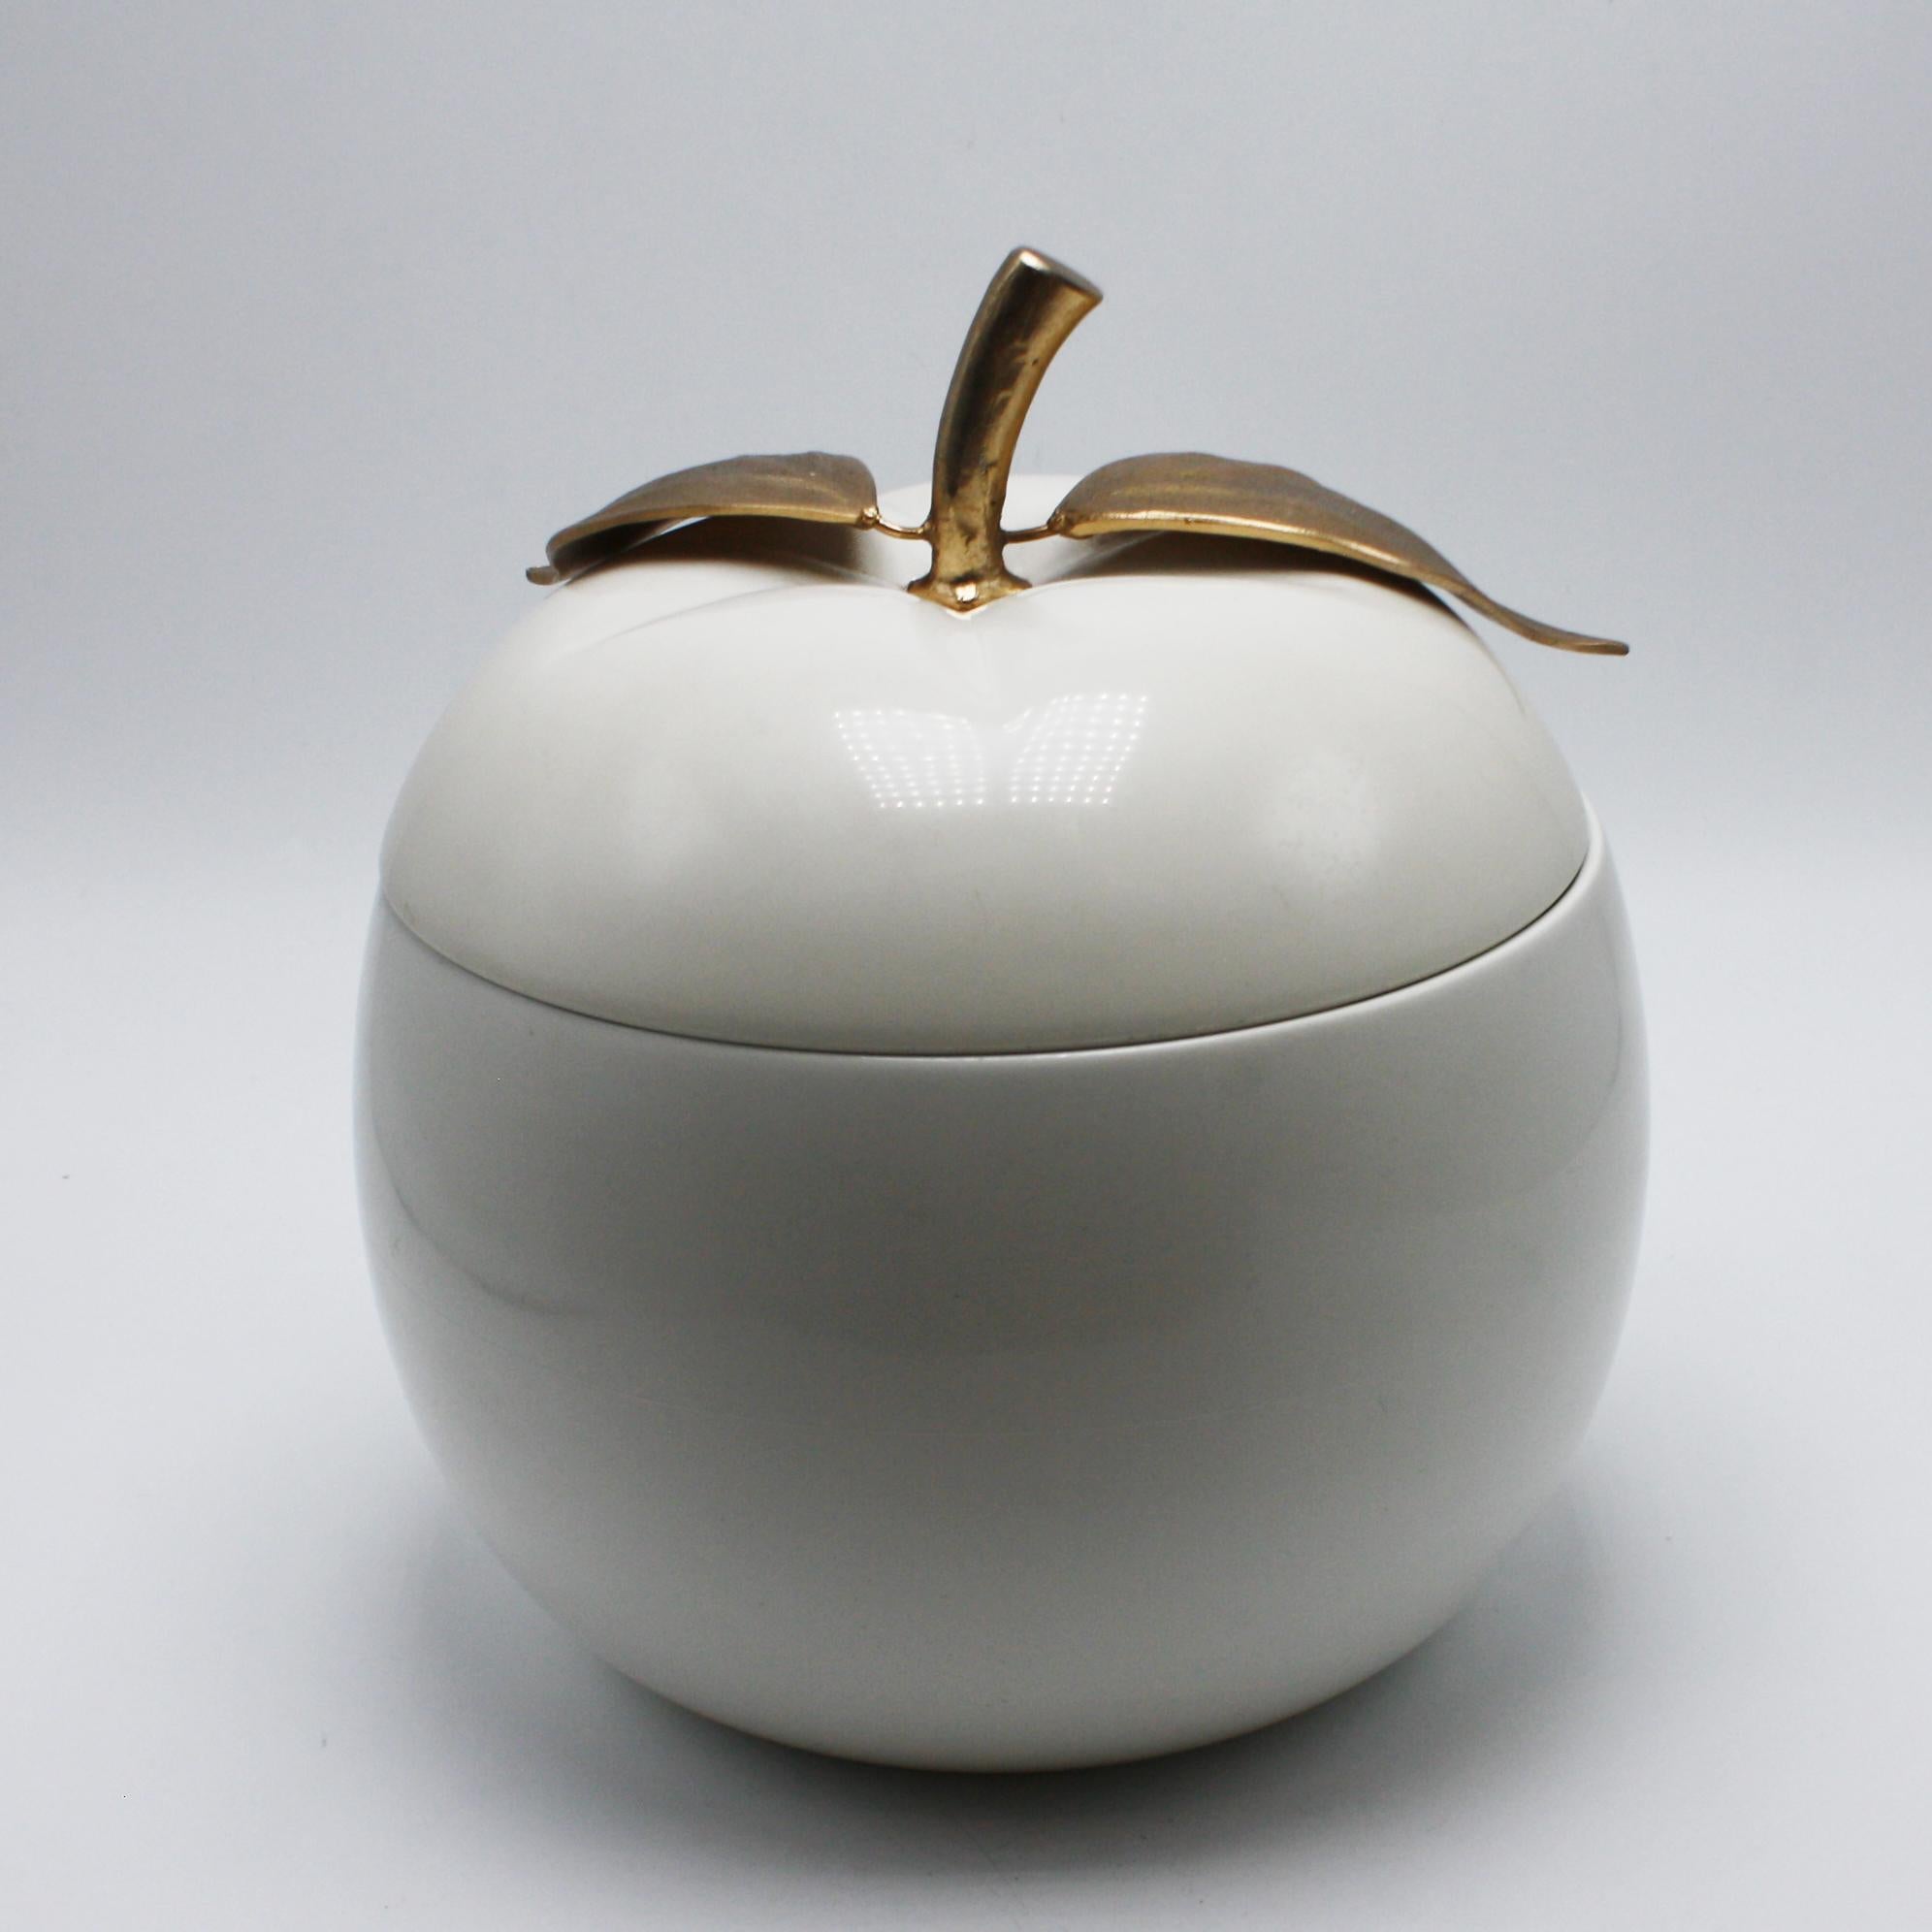 Freddotherm Apple Ice Bucket Gold-Plated by Hans Turnwald, circa 1960 2